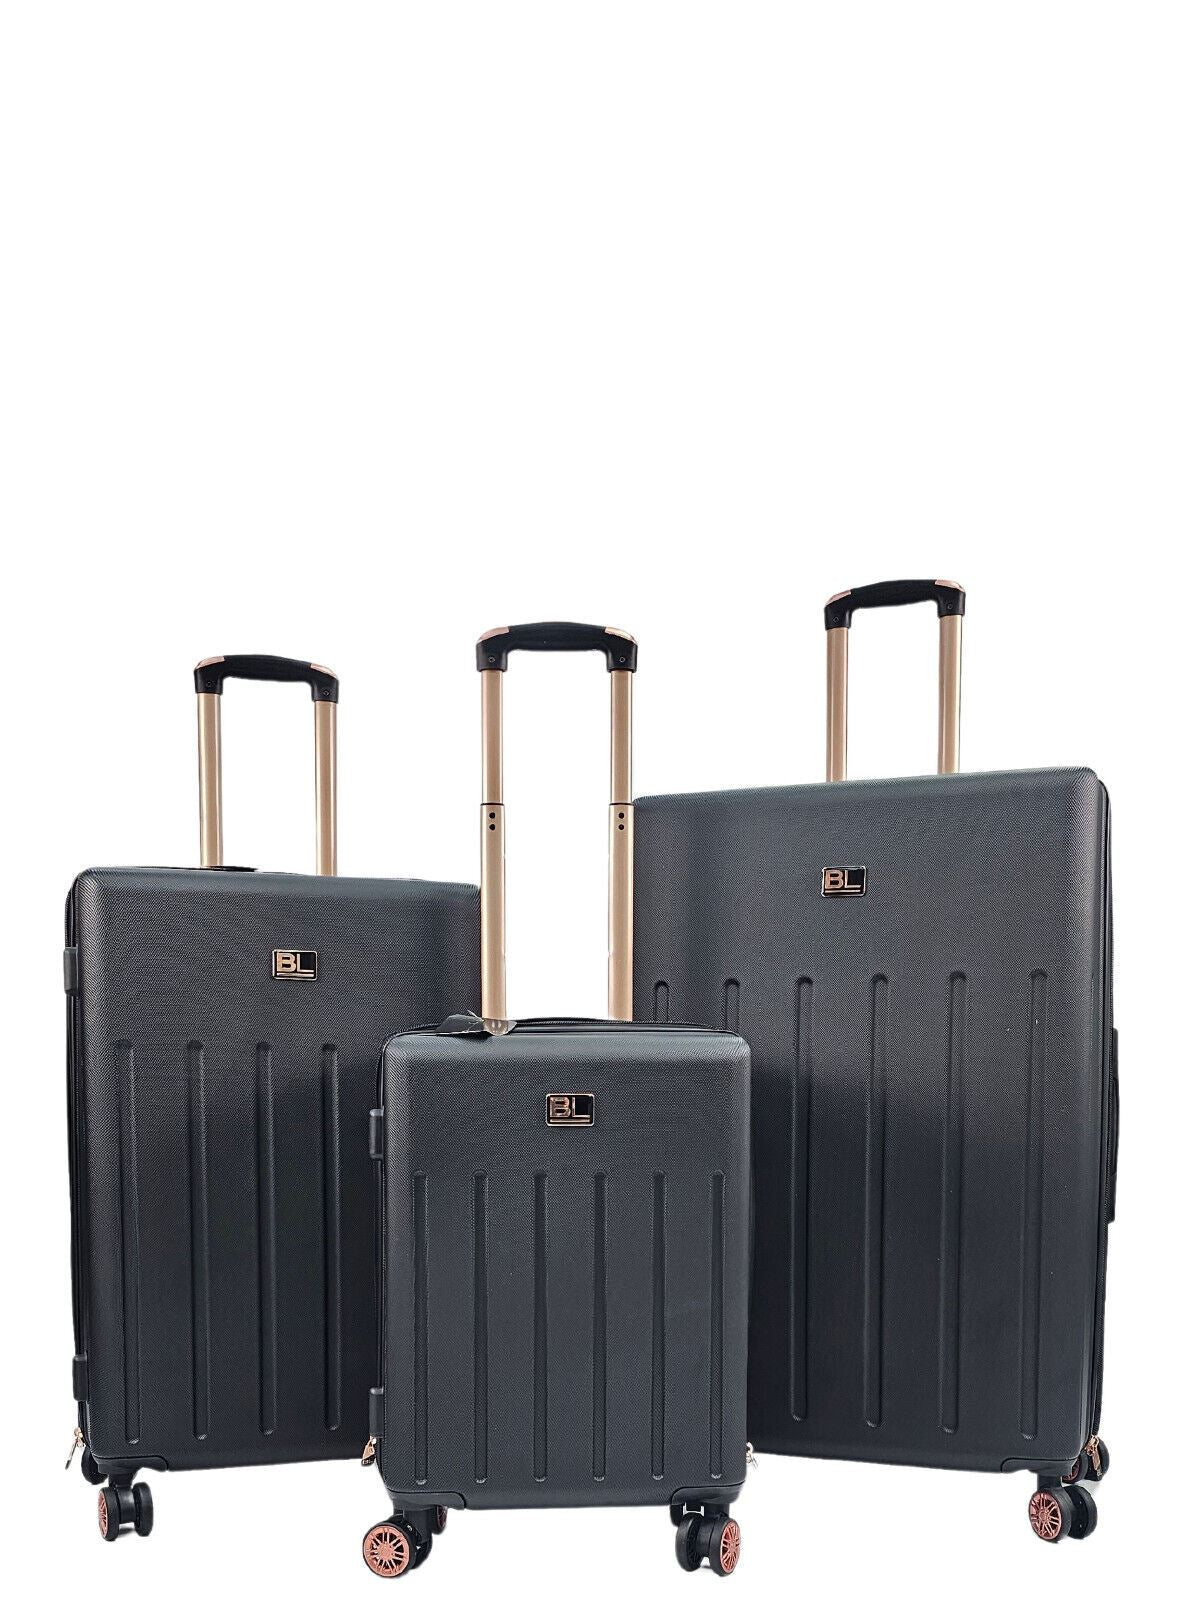 Columbia Set of 3 Soft Shell Suitcase in Black